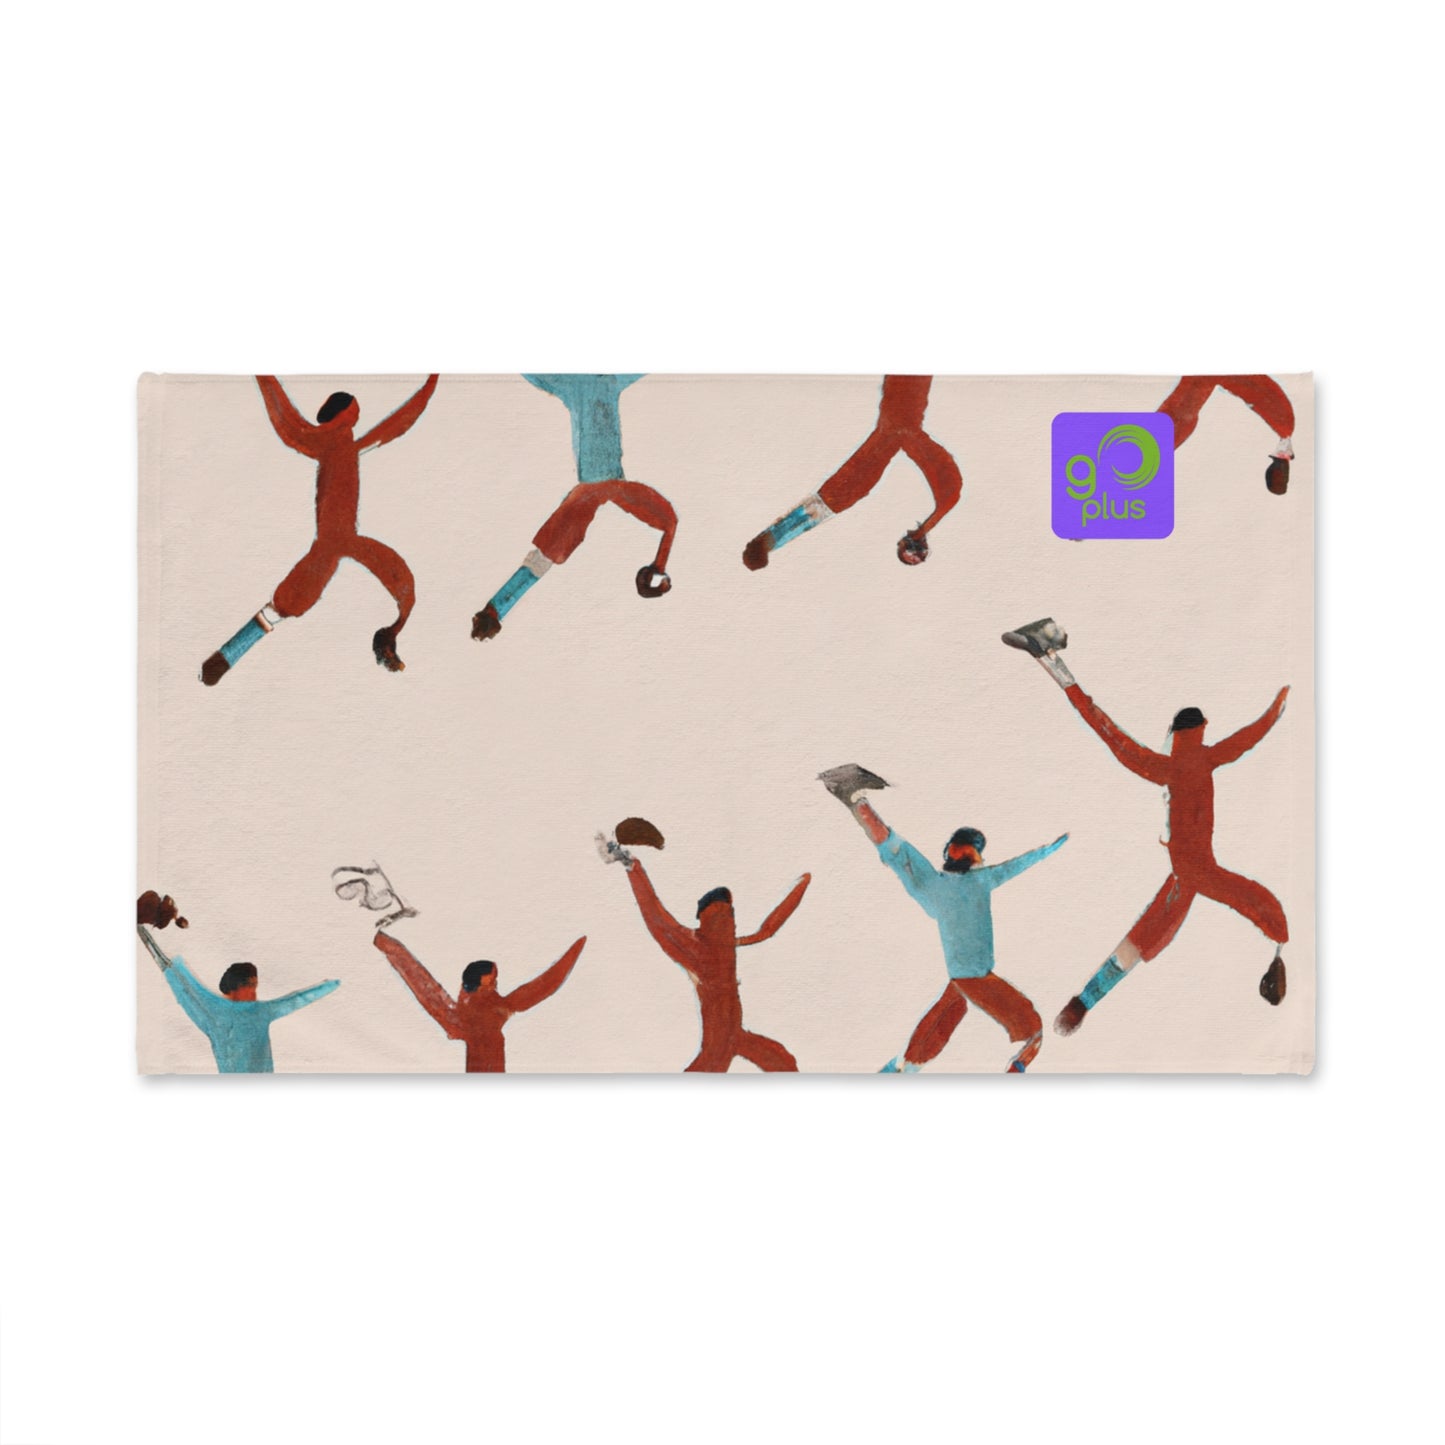 "The Colorful Game" - Go Plus Hand towel